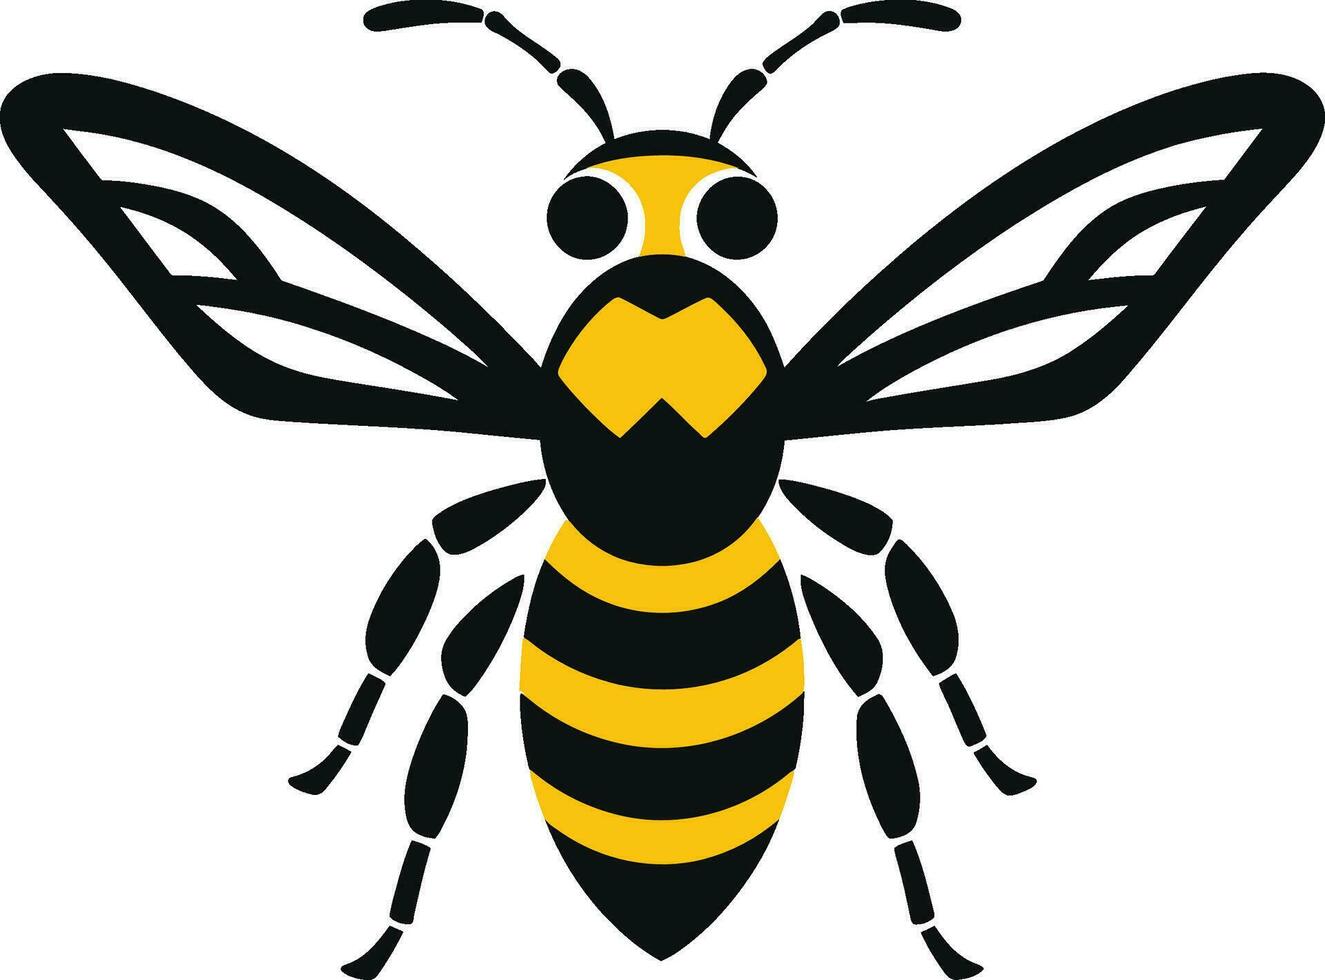 Monochrome Insect Tyrant Silent Wasp Avenger Icon vector